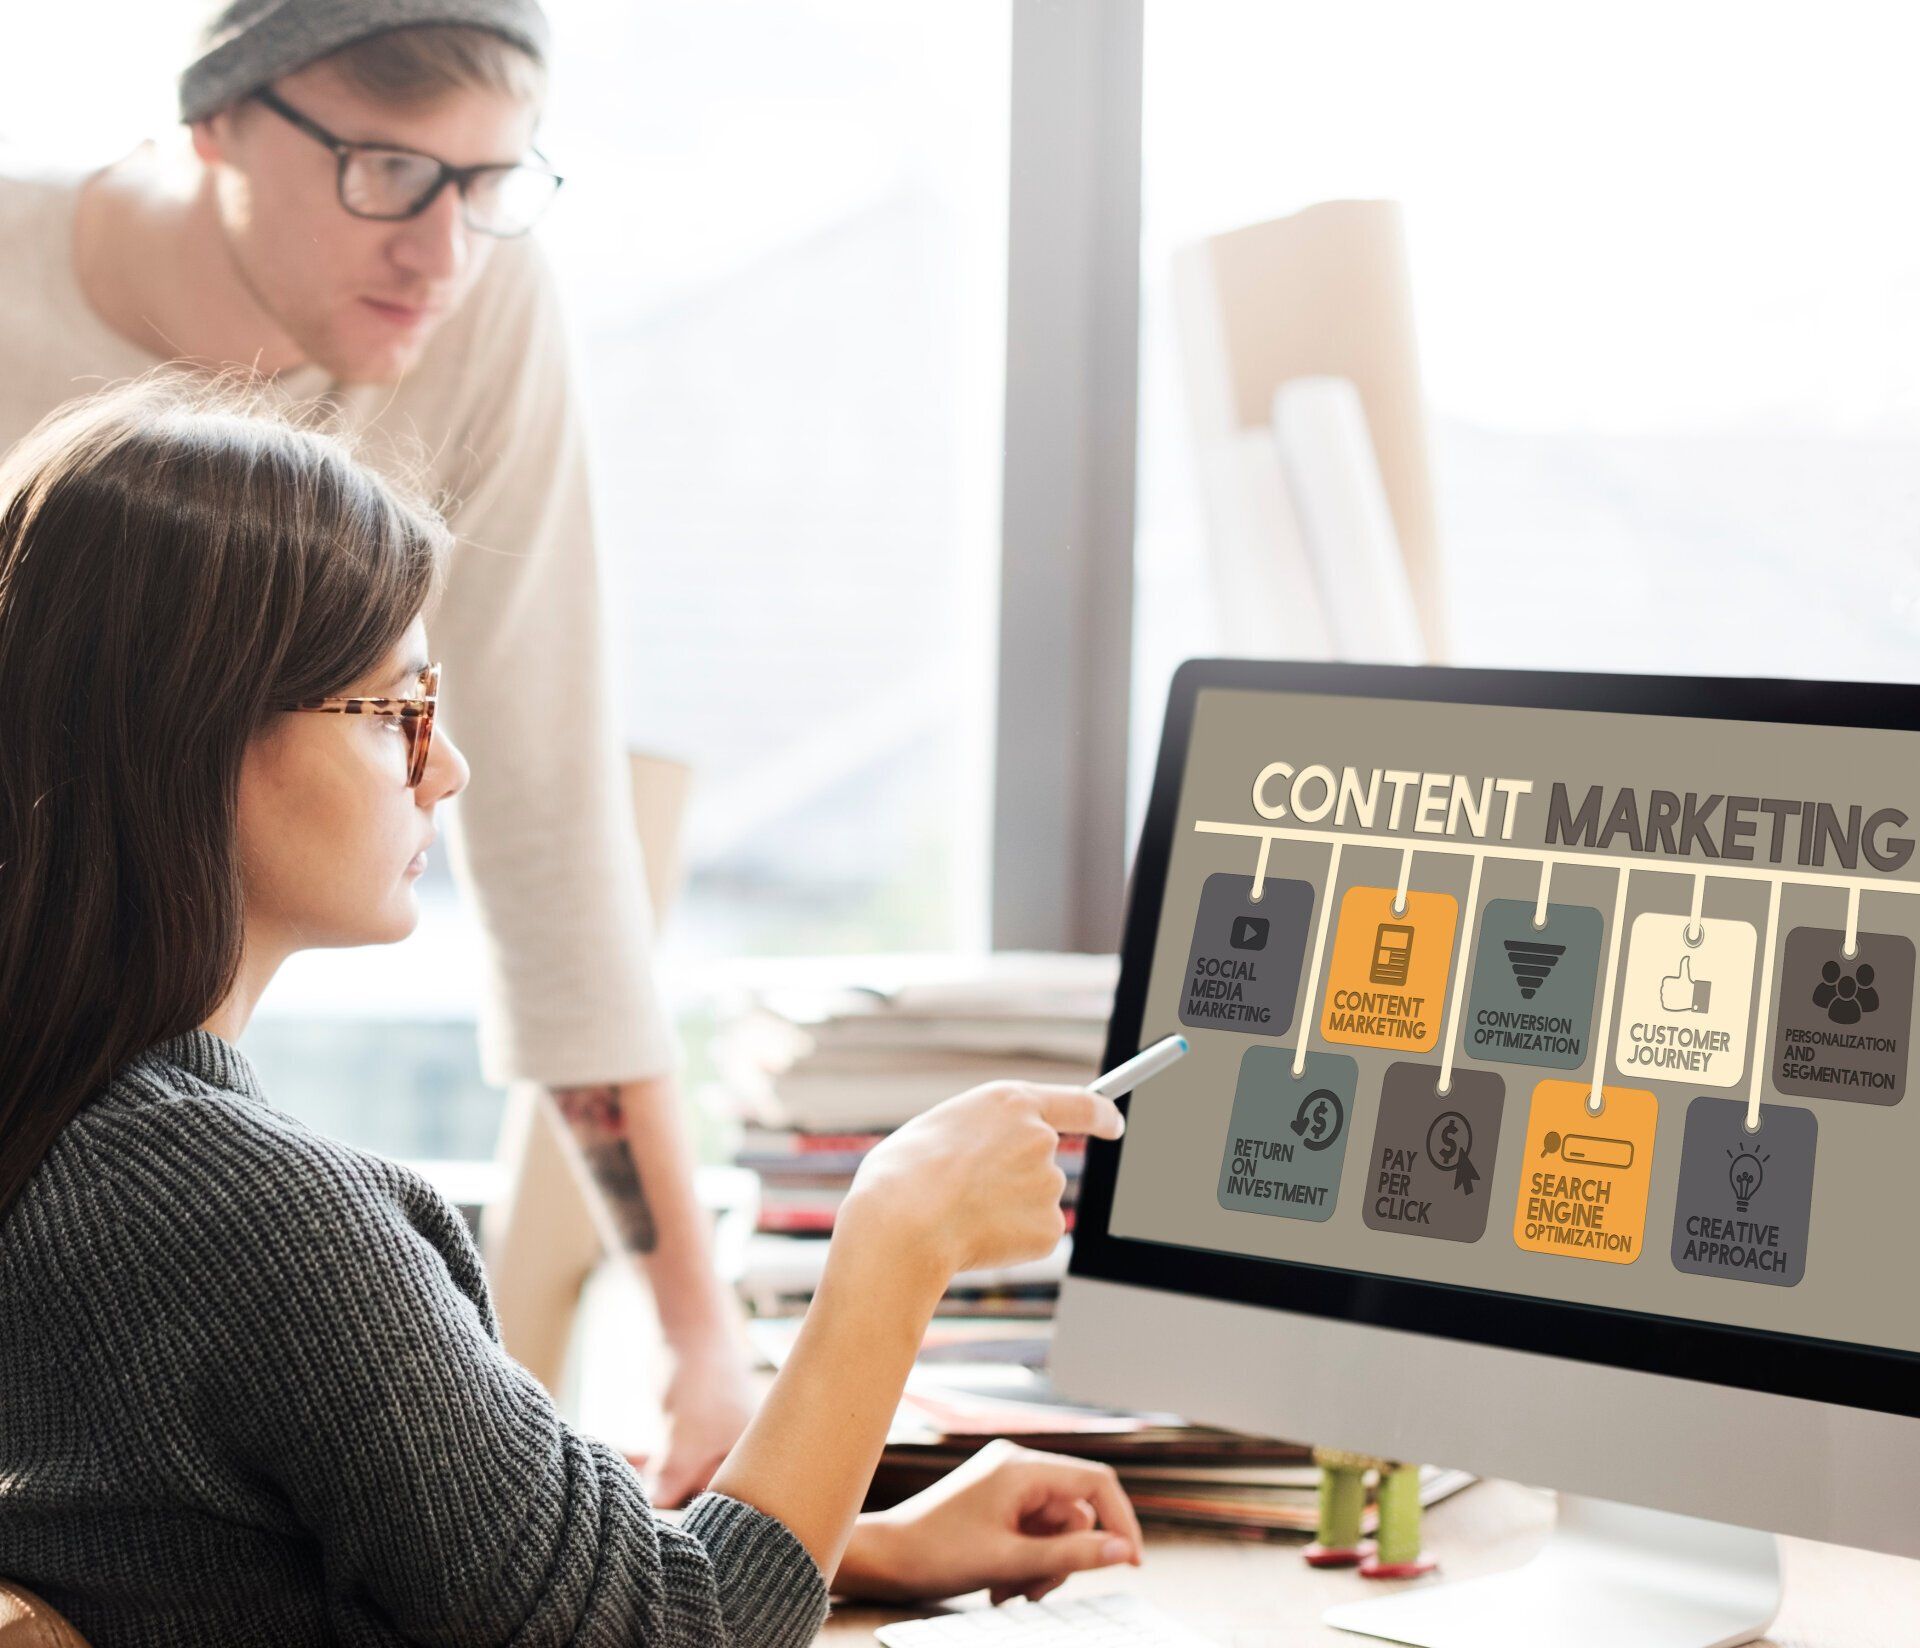 Content Marketing Services in Texas